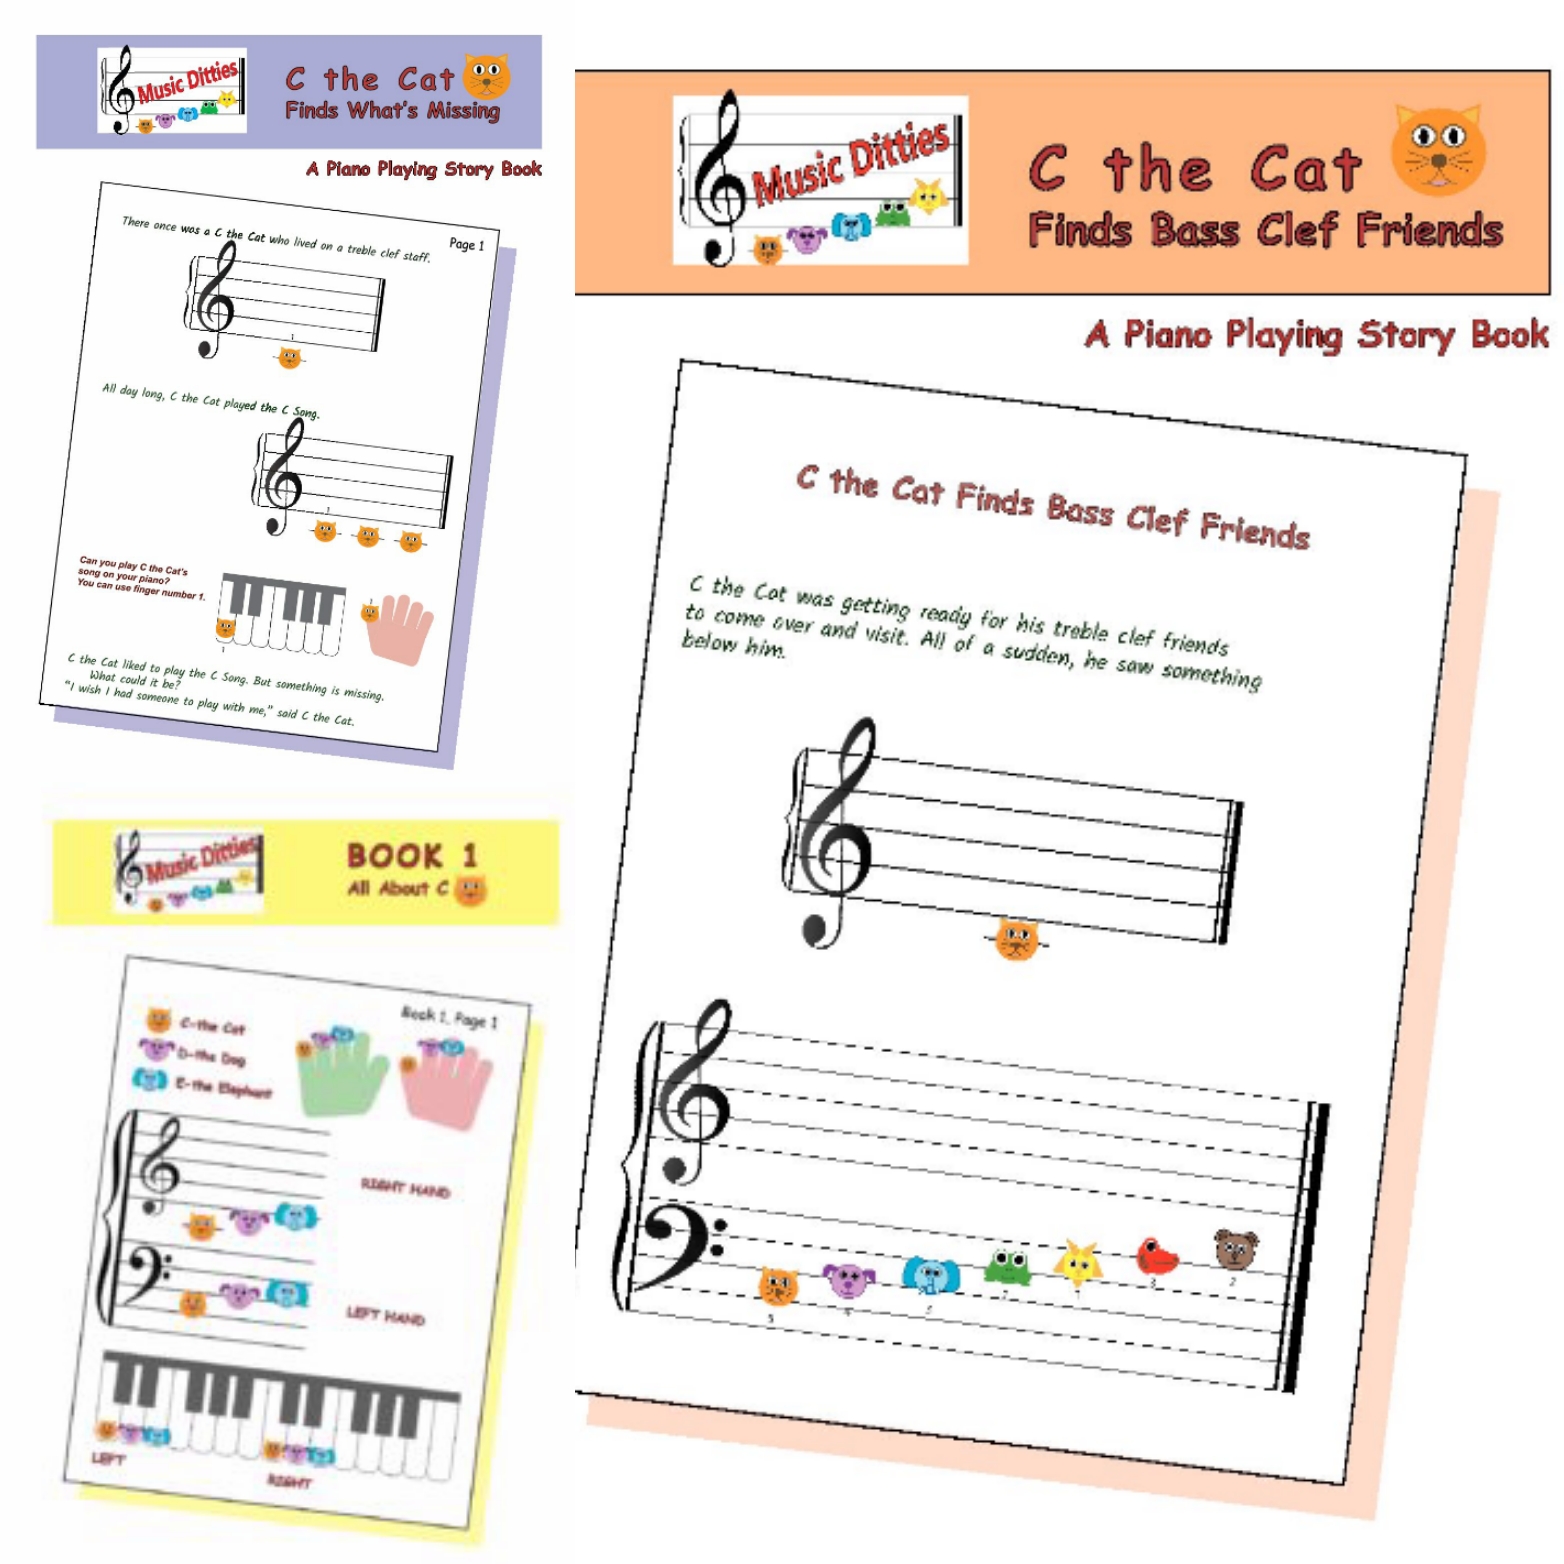 A piano playing story book with notes and music symbols.